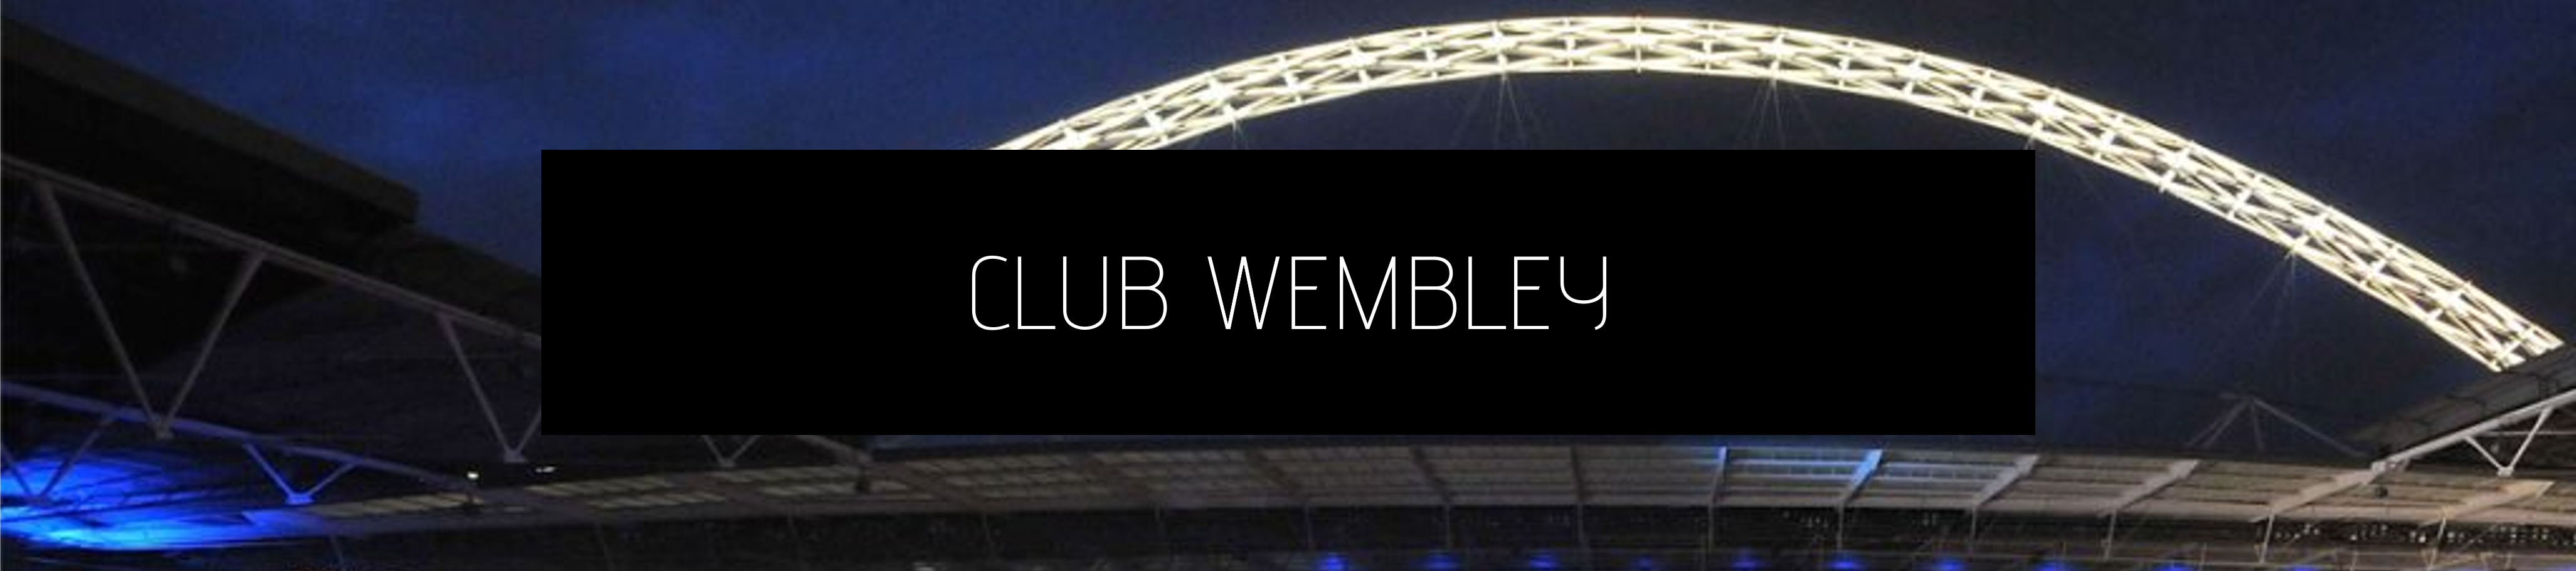 buy club wembley boxing tickets and silver hospitality for FURY vs WHYTE boxing at wembley on april 23